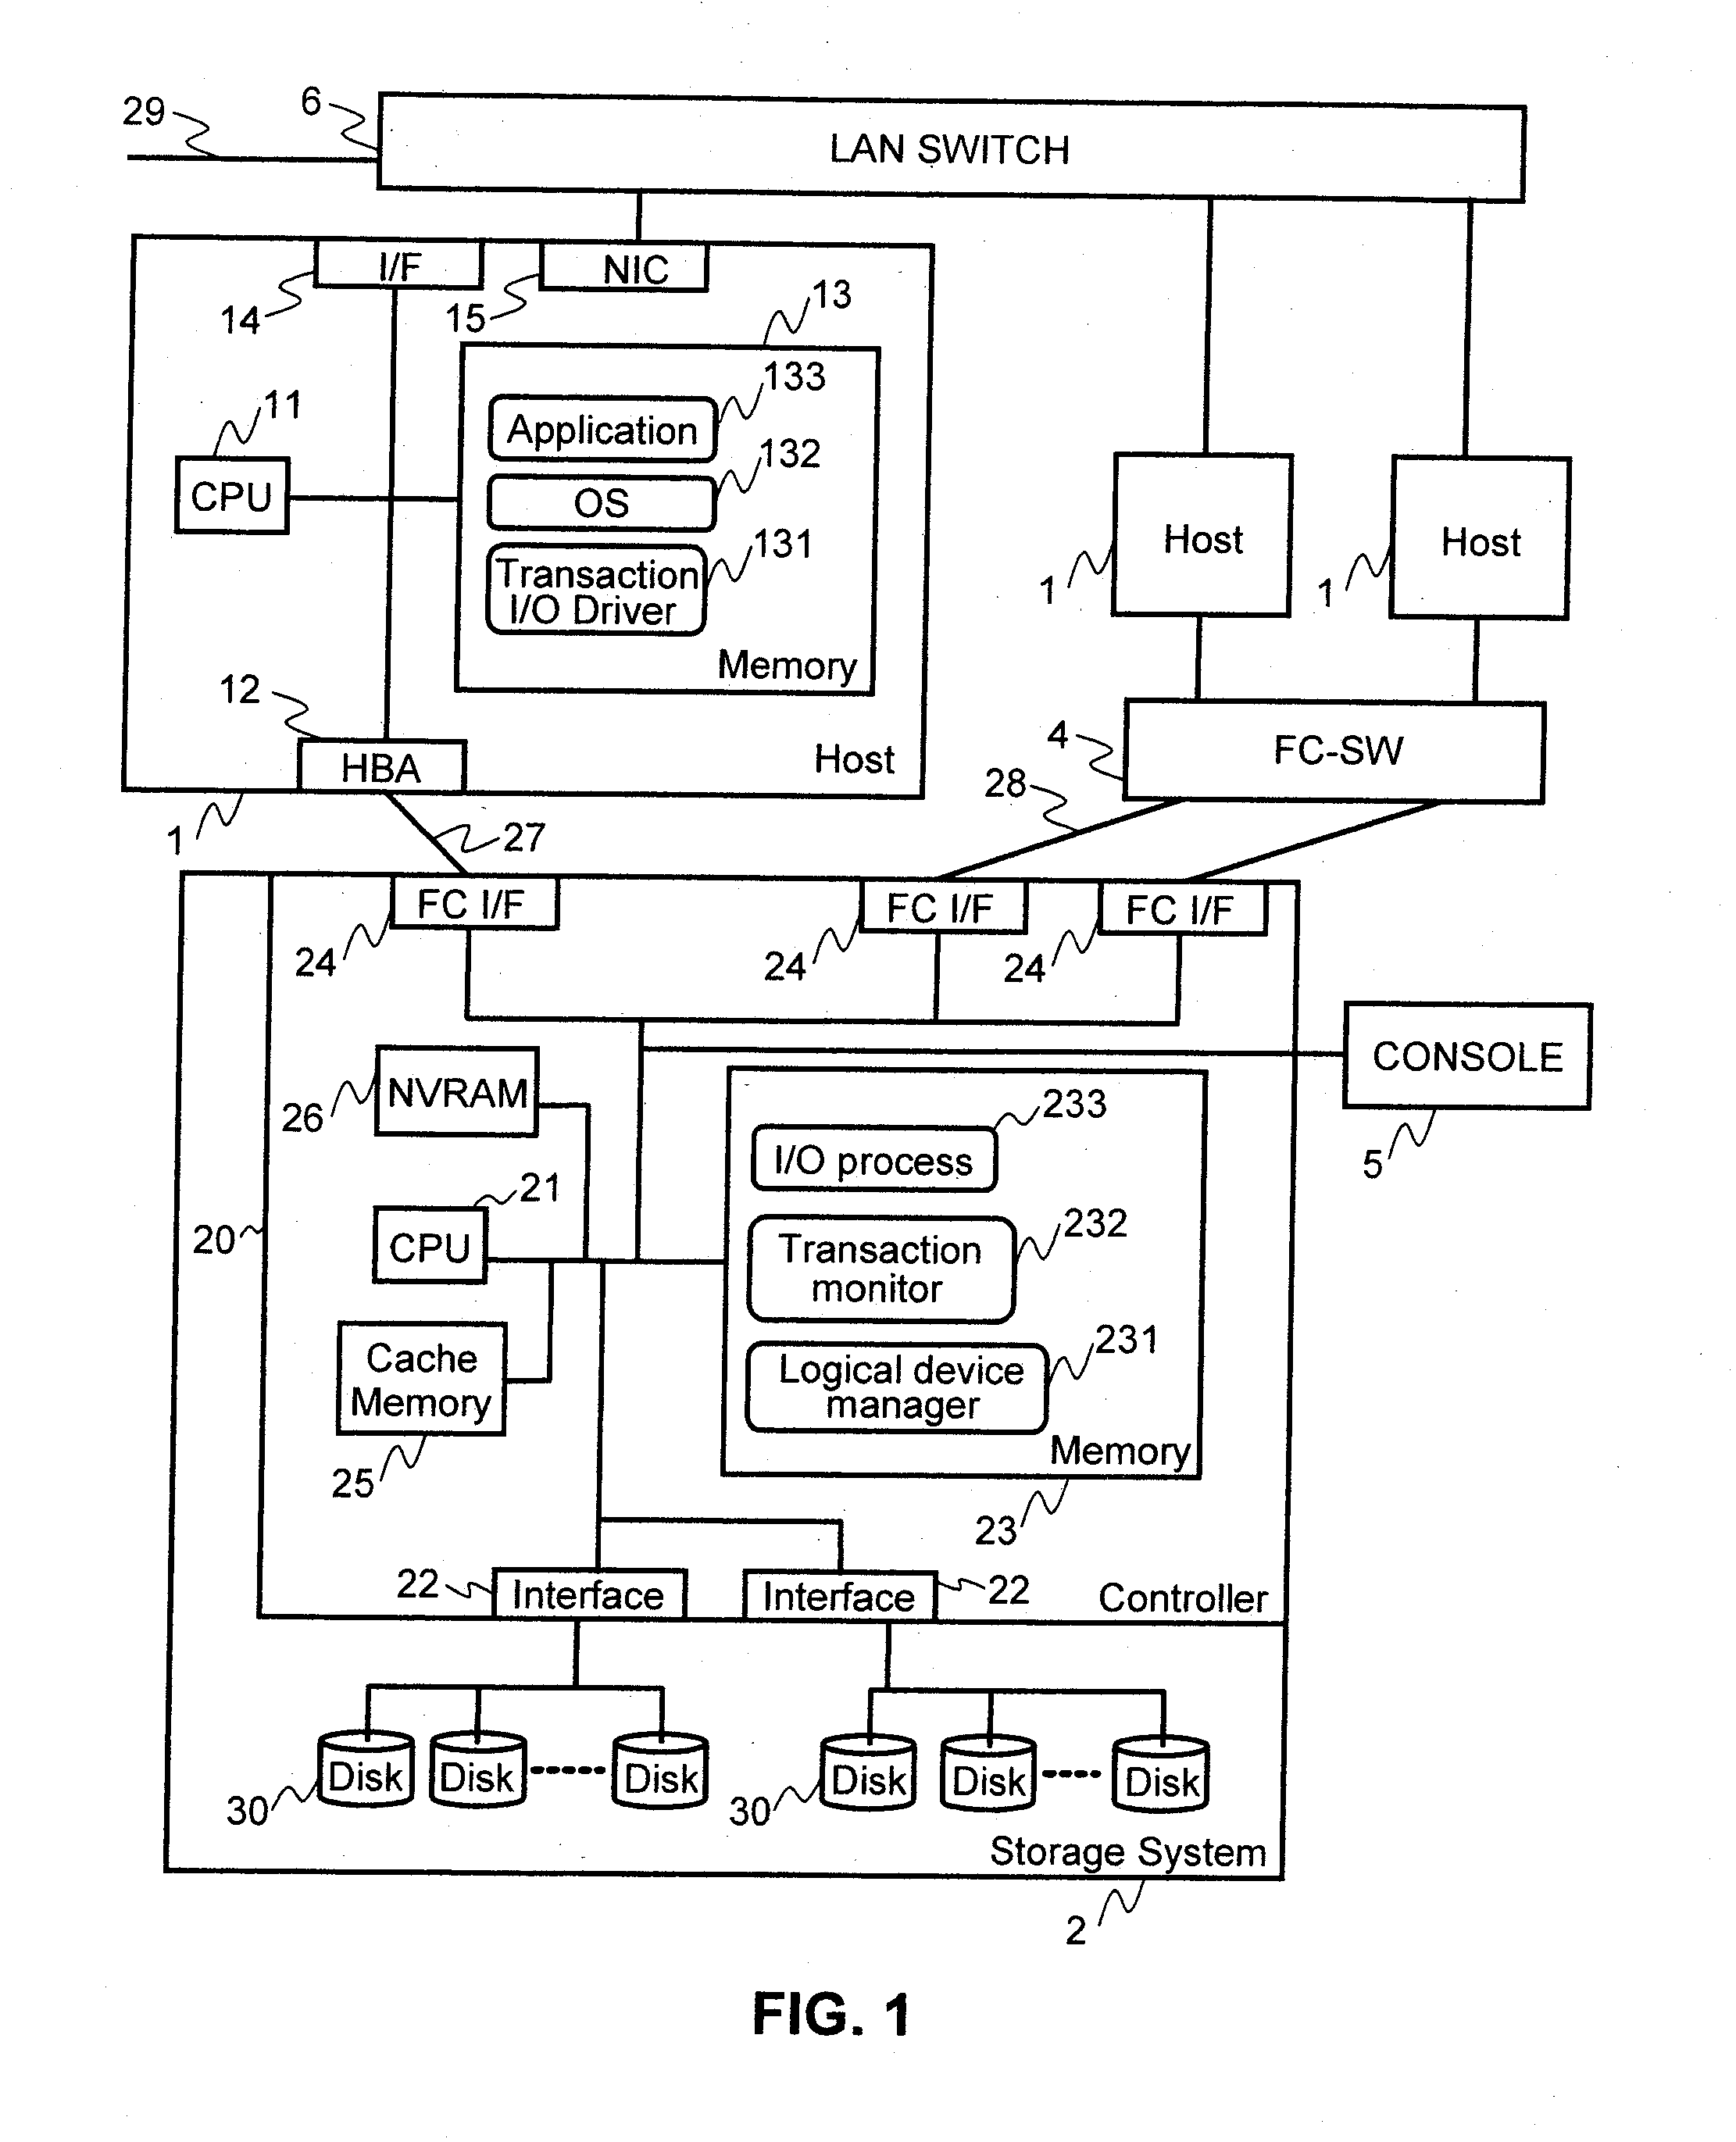 Modeling computer applications and storage used thereby